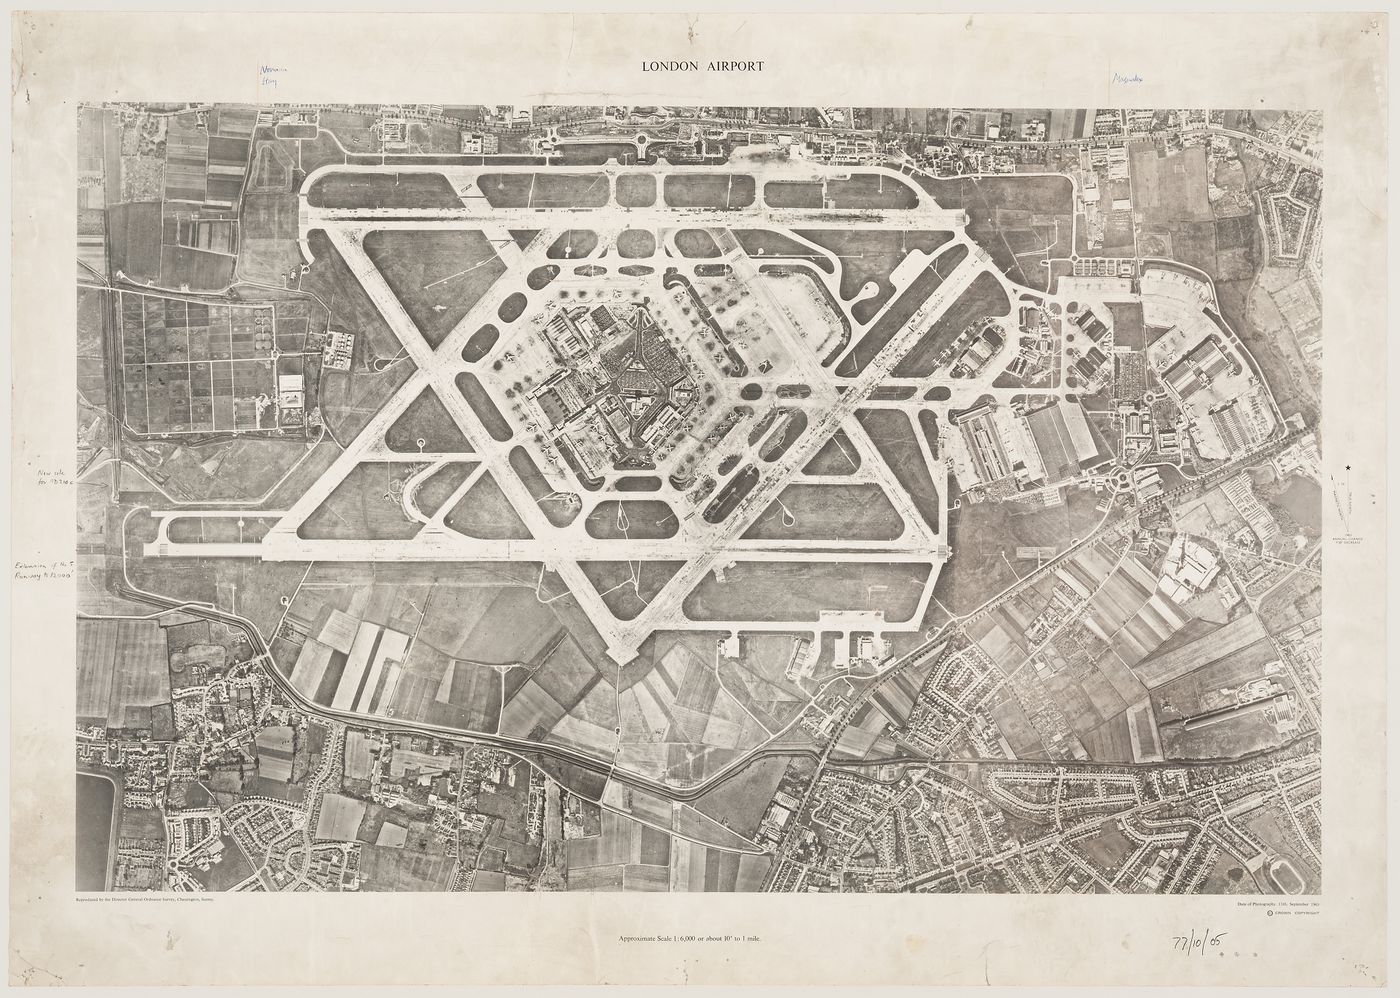 Aerial view of London Airport (Heathrow), Greater London, England